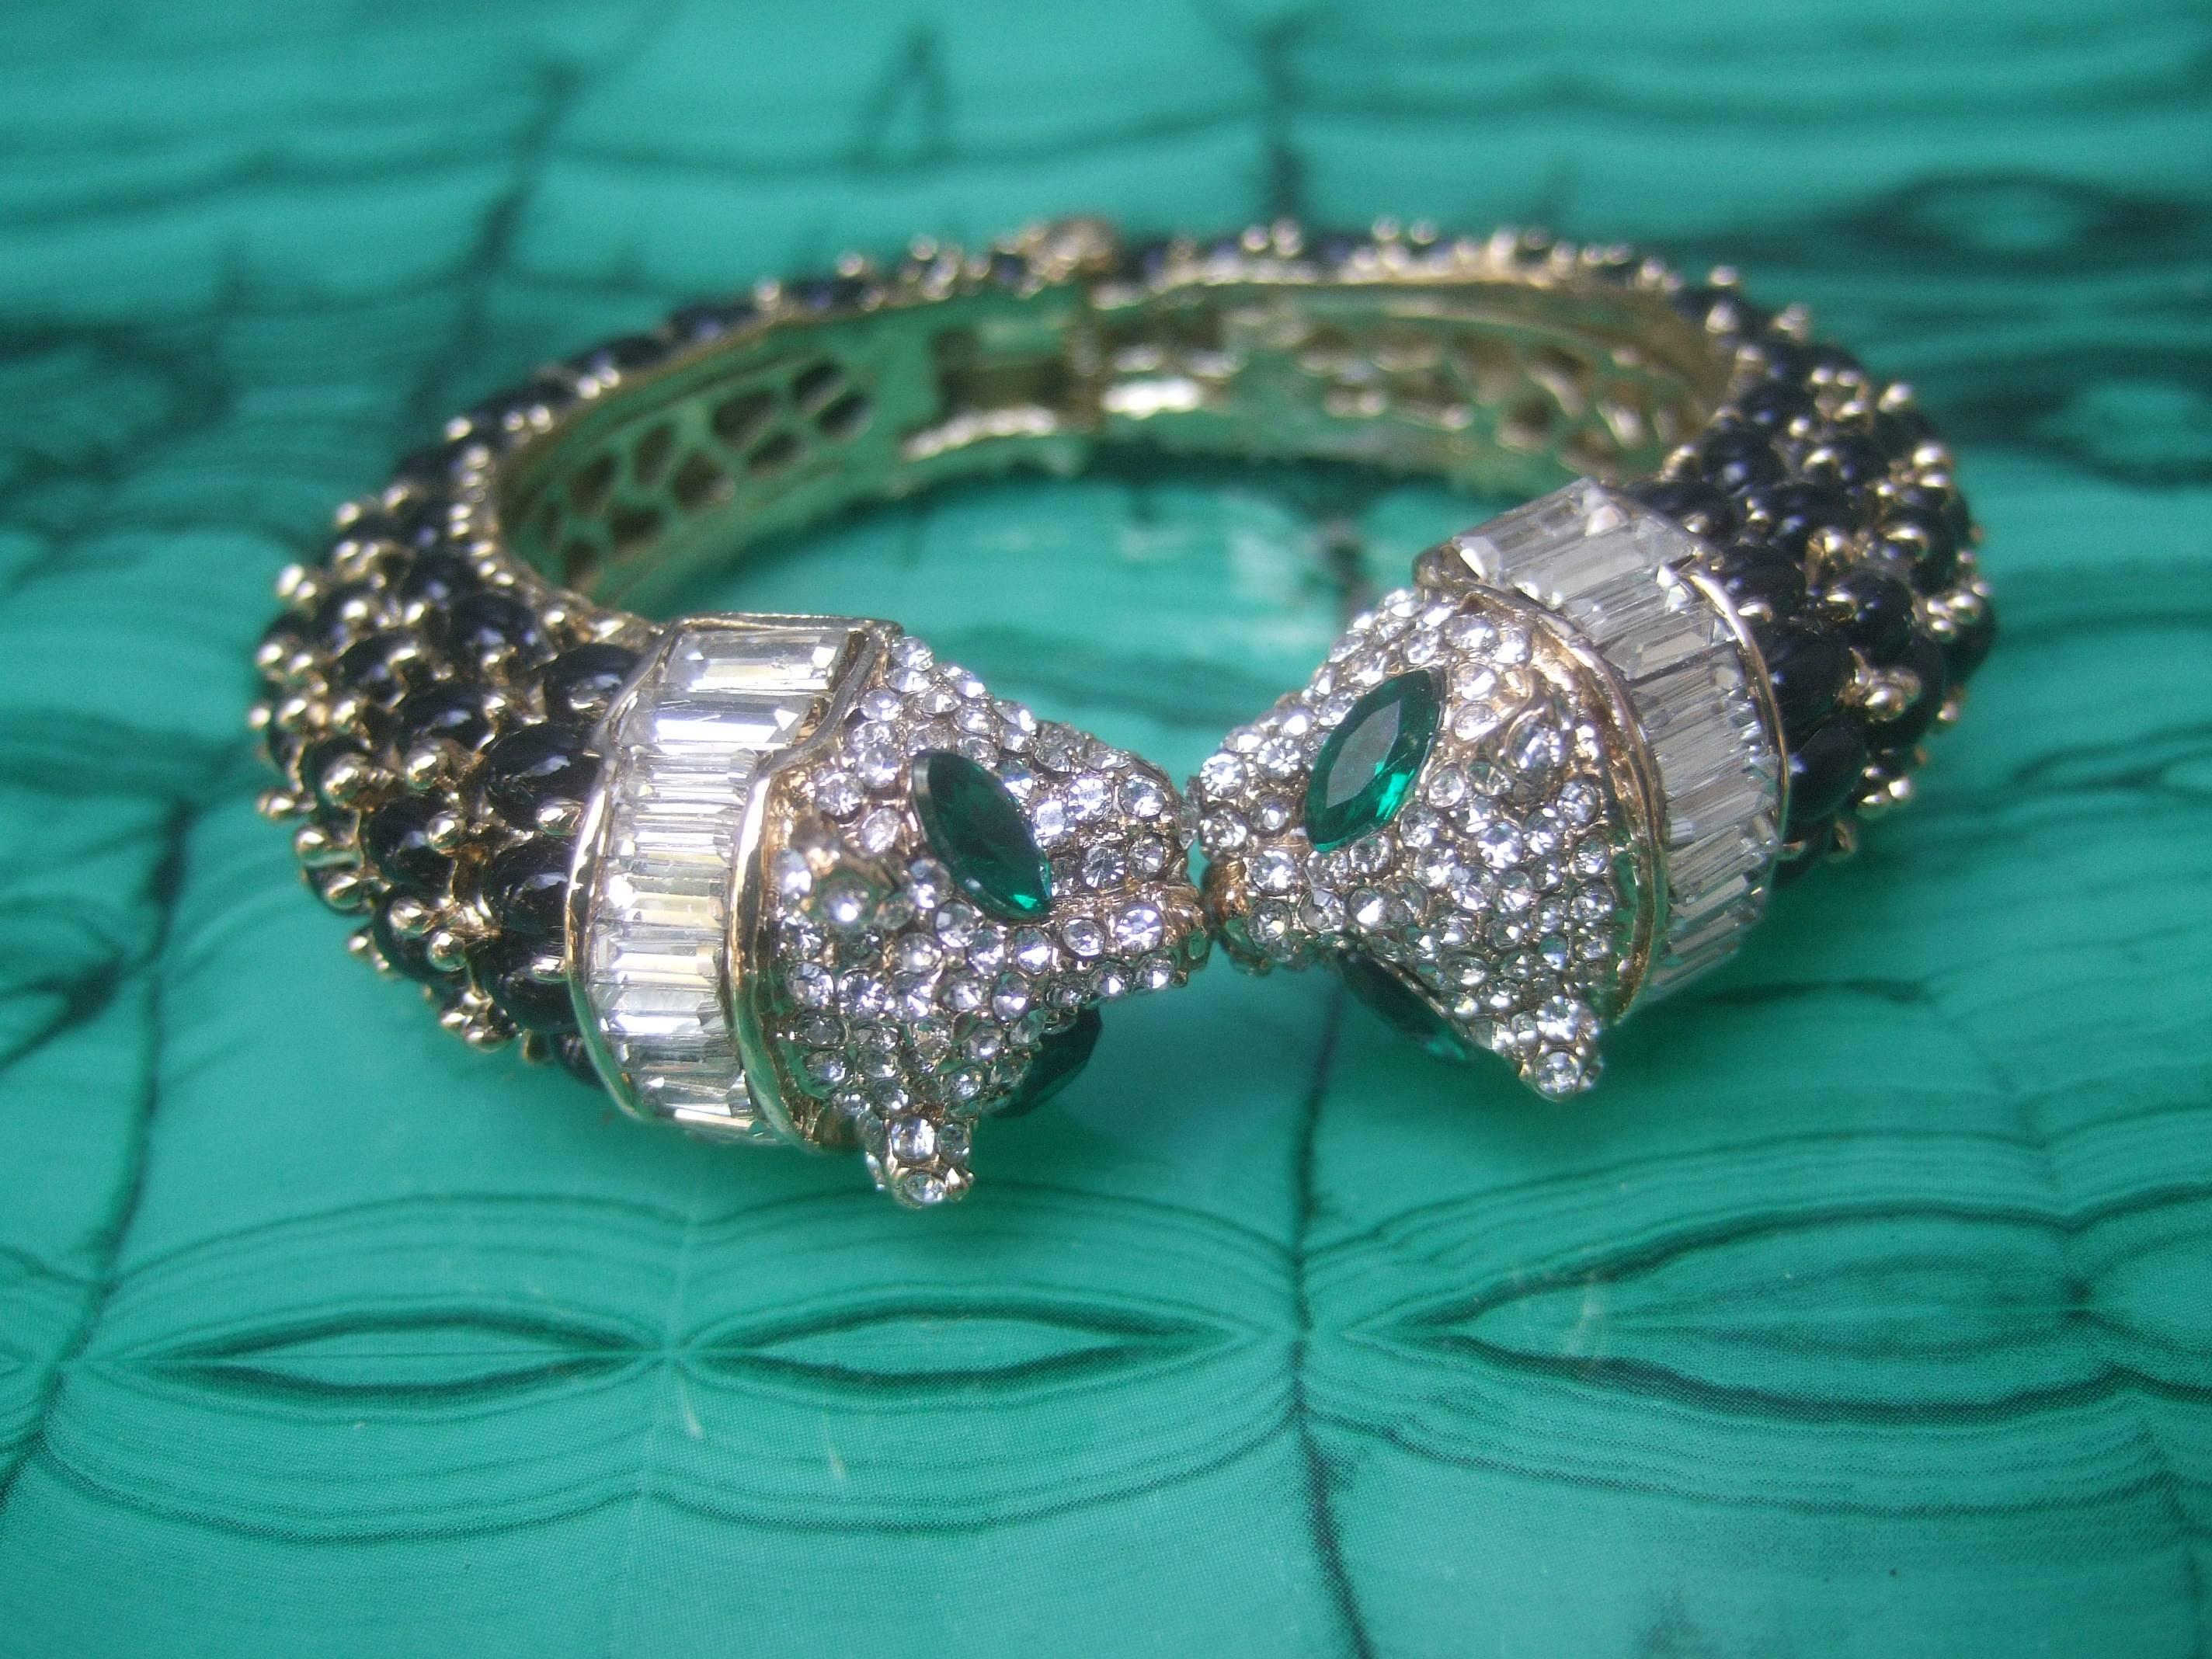 Exquisite crystal & glass jeweled panther bracelet 
The exotic hinged feline bracelet is encrusted
with rows of ebony glass cabochons on the sides

The panther's head is embellished with emerald
green color crystals with glittering pave accents
The